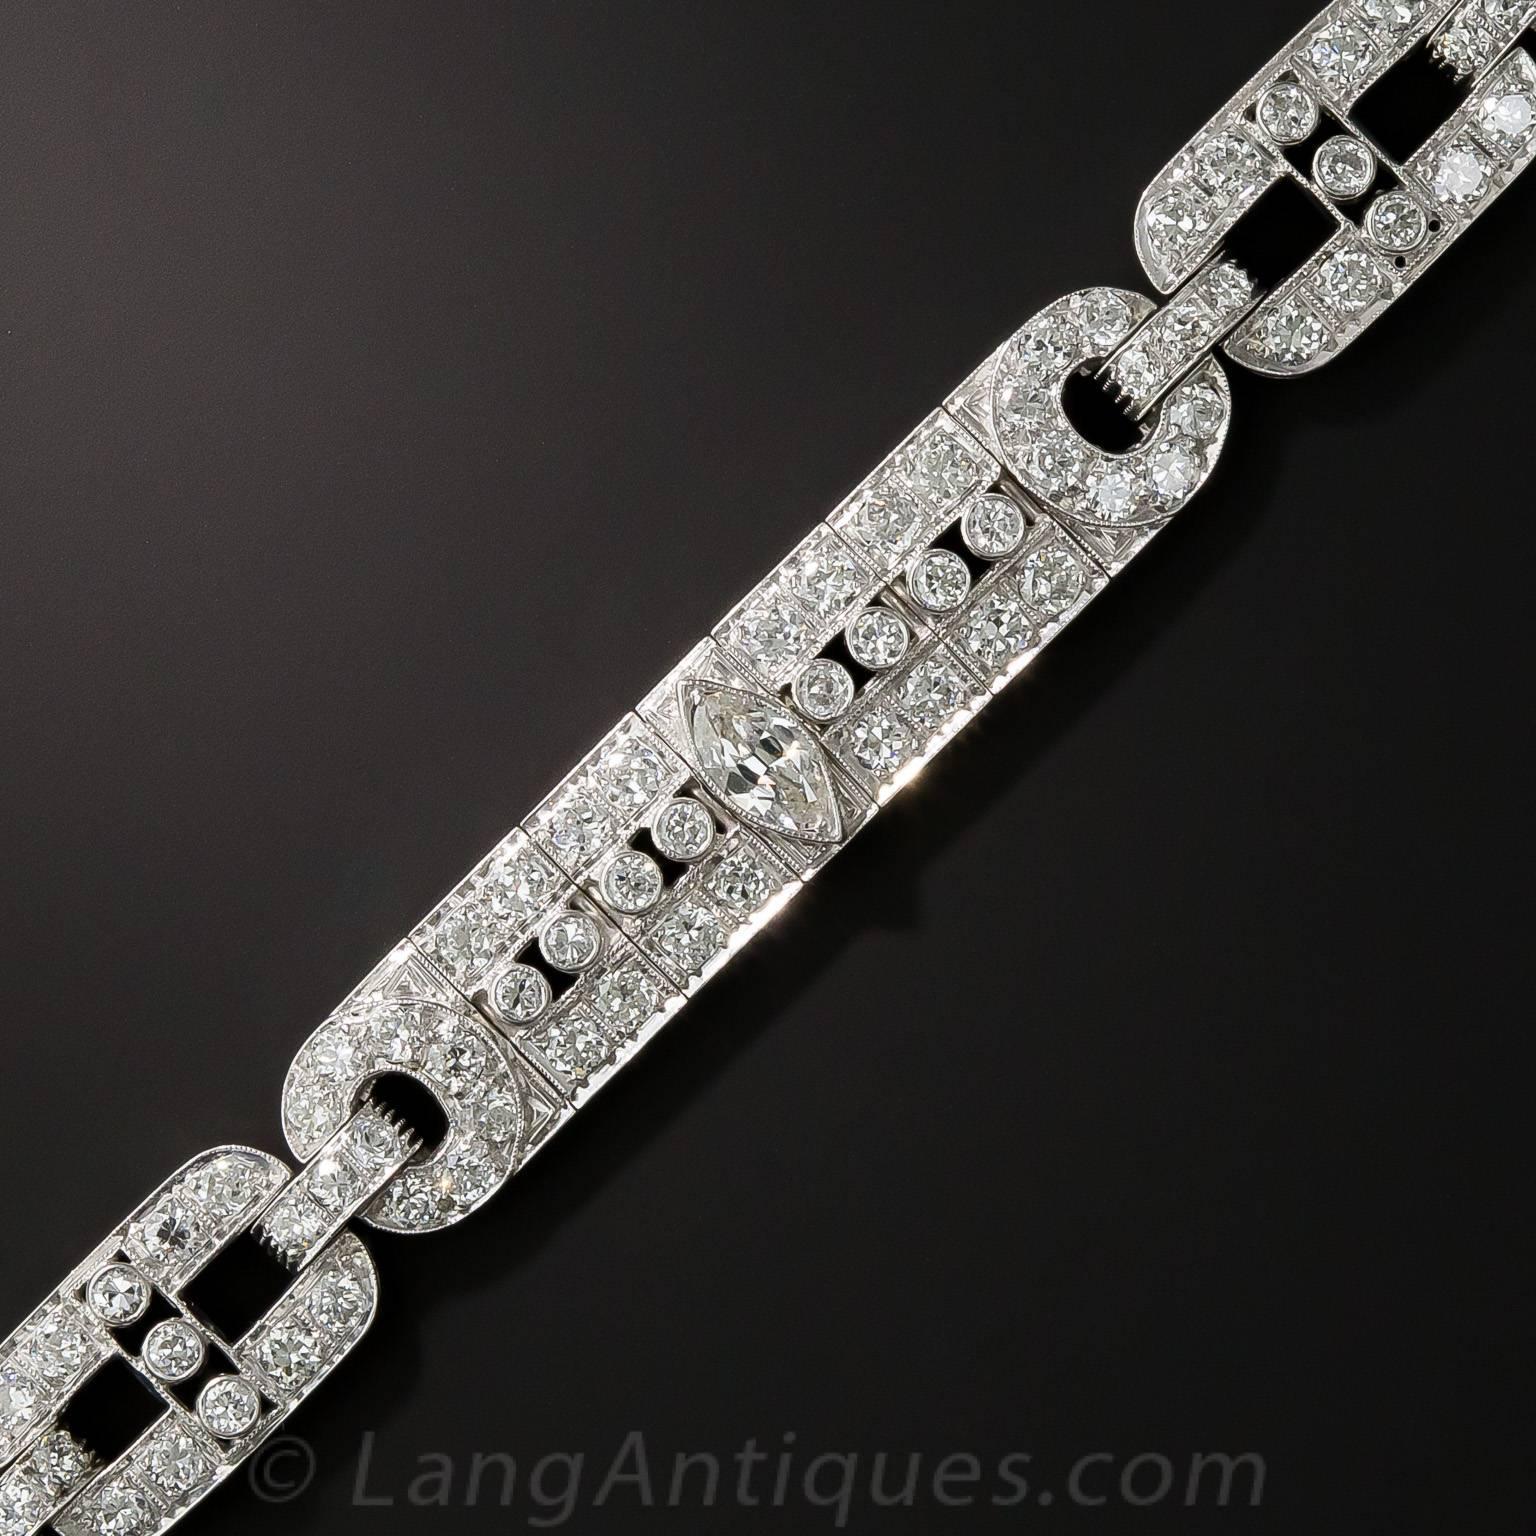 Three-eighths inches wide, and thus eminently wearable, this consummate platinum and diamond Art Deco jewel dates from the peak of the period - circa 1925-35. The sleek and lithely constructed bracelet is packed with 6.25 carats of bright white